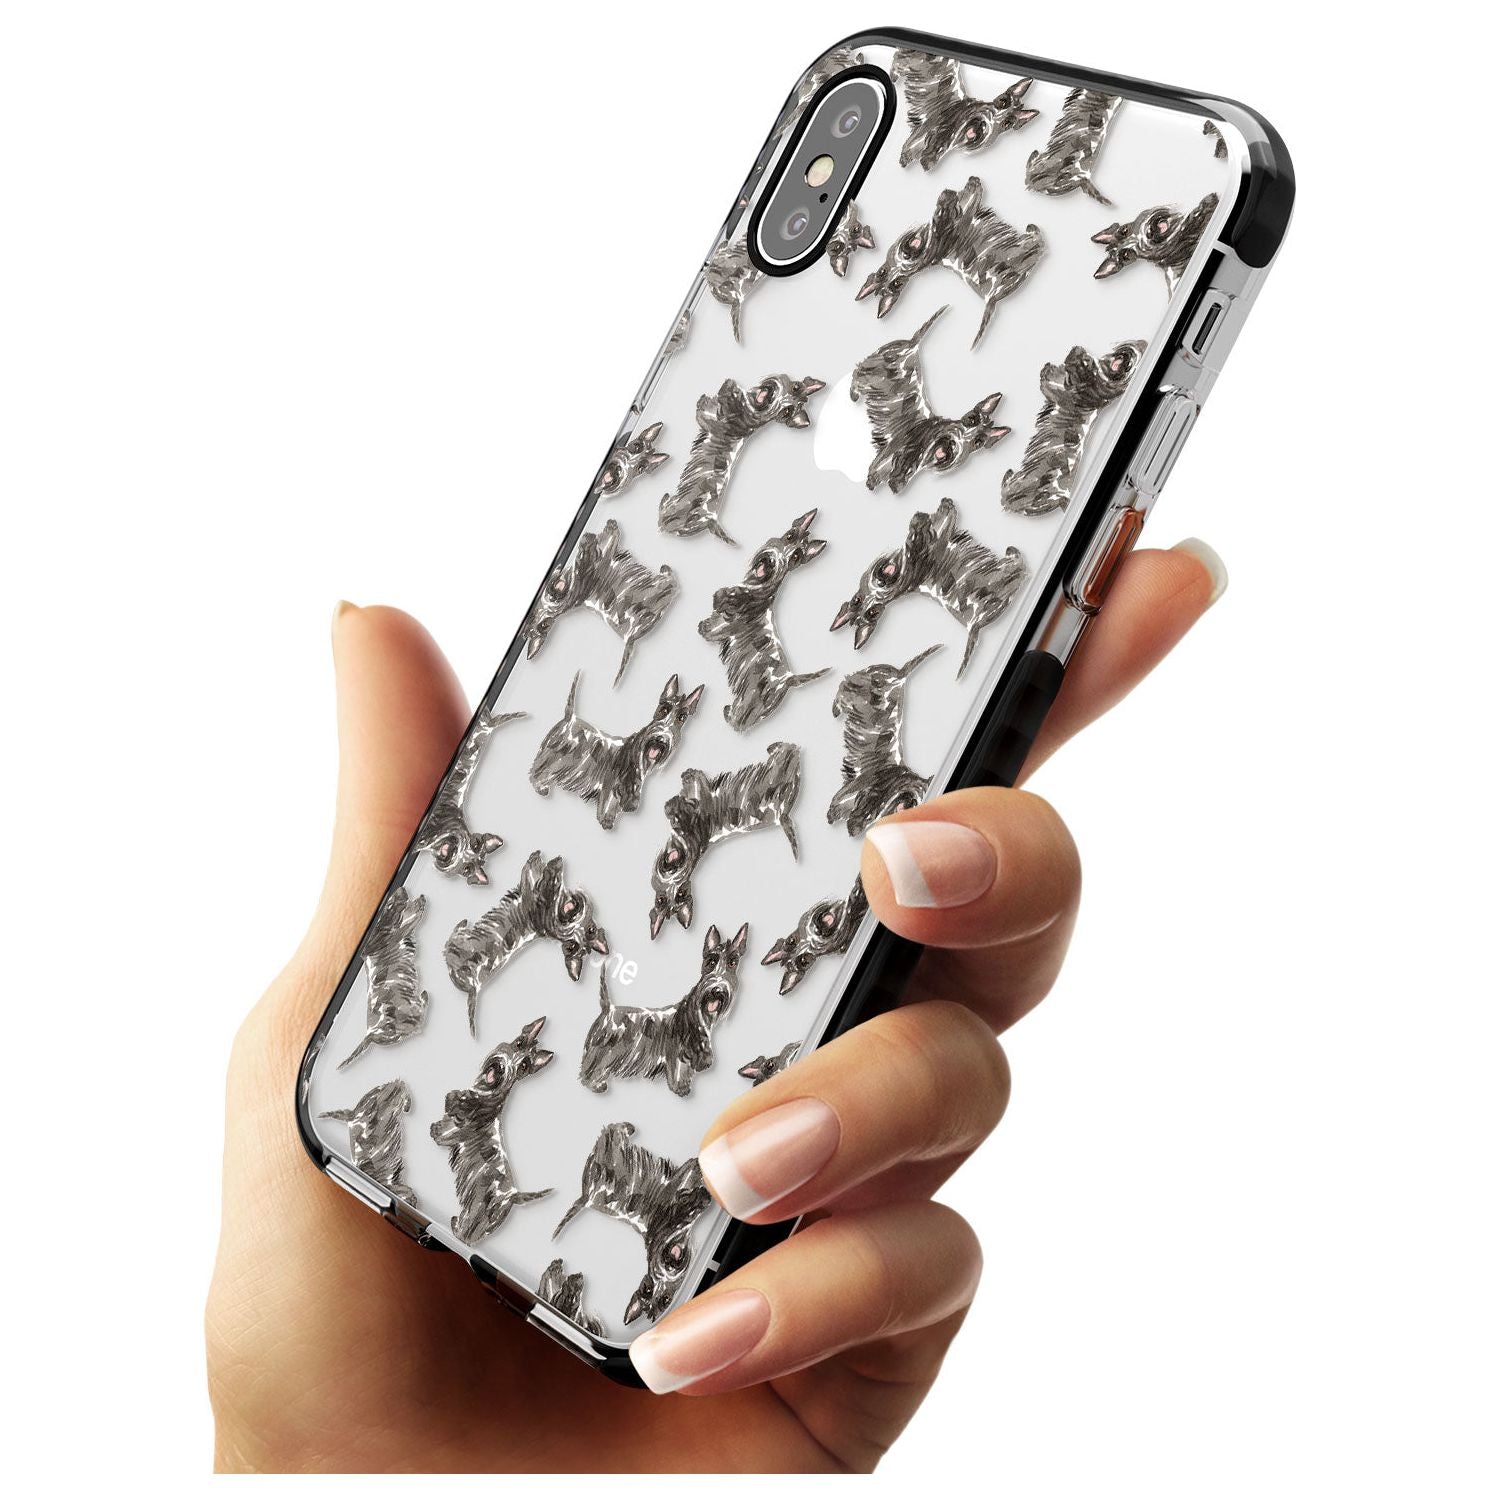 Scottish Terrier Watercolour Dog Pattern Black Impact Phone Case for iPhone X XS Max XR